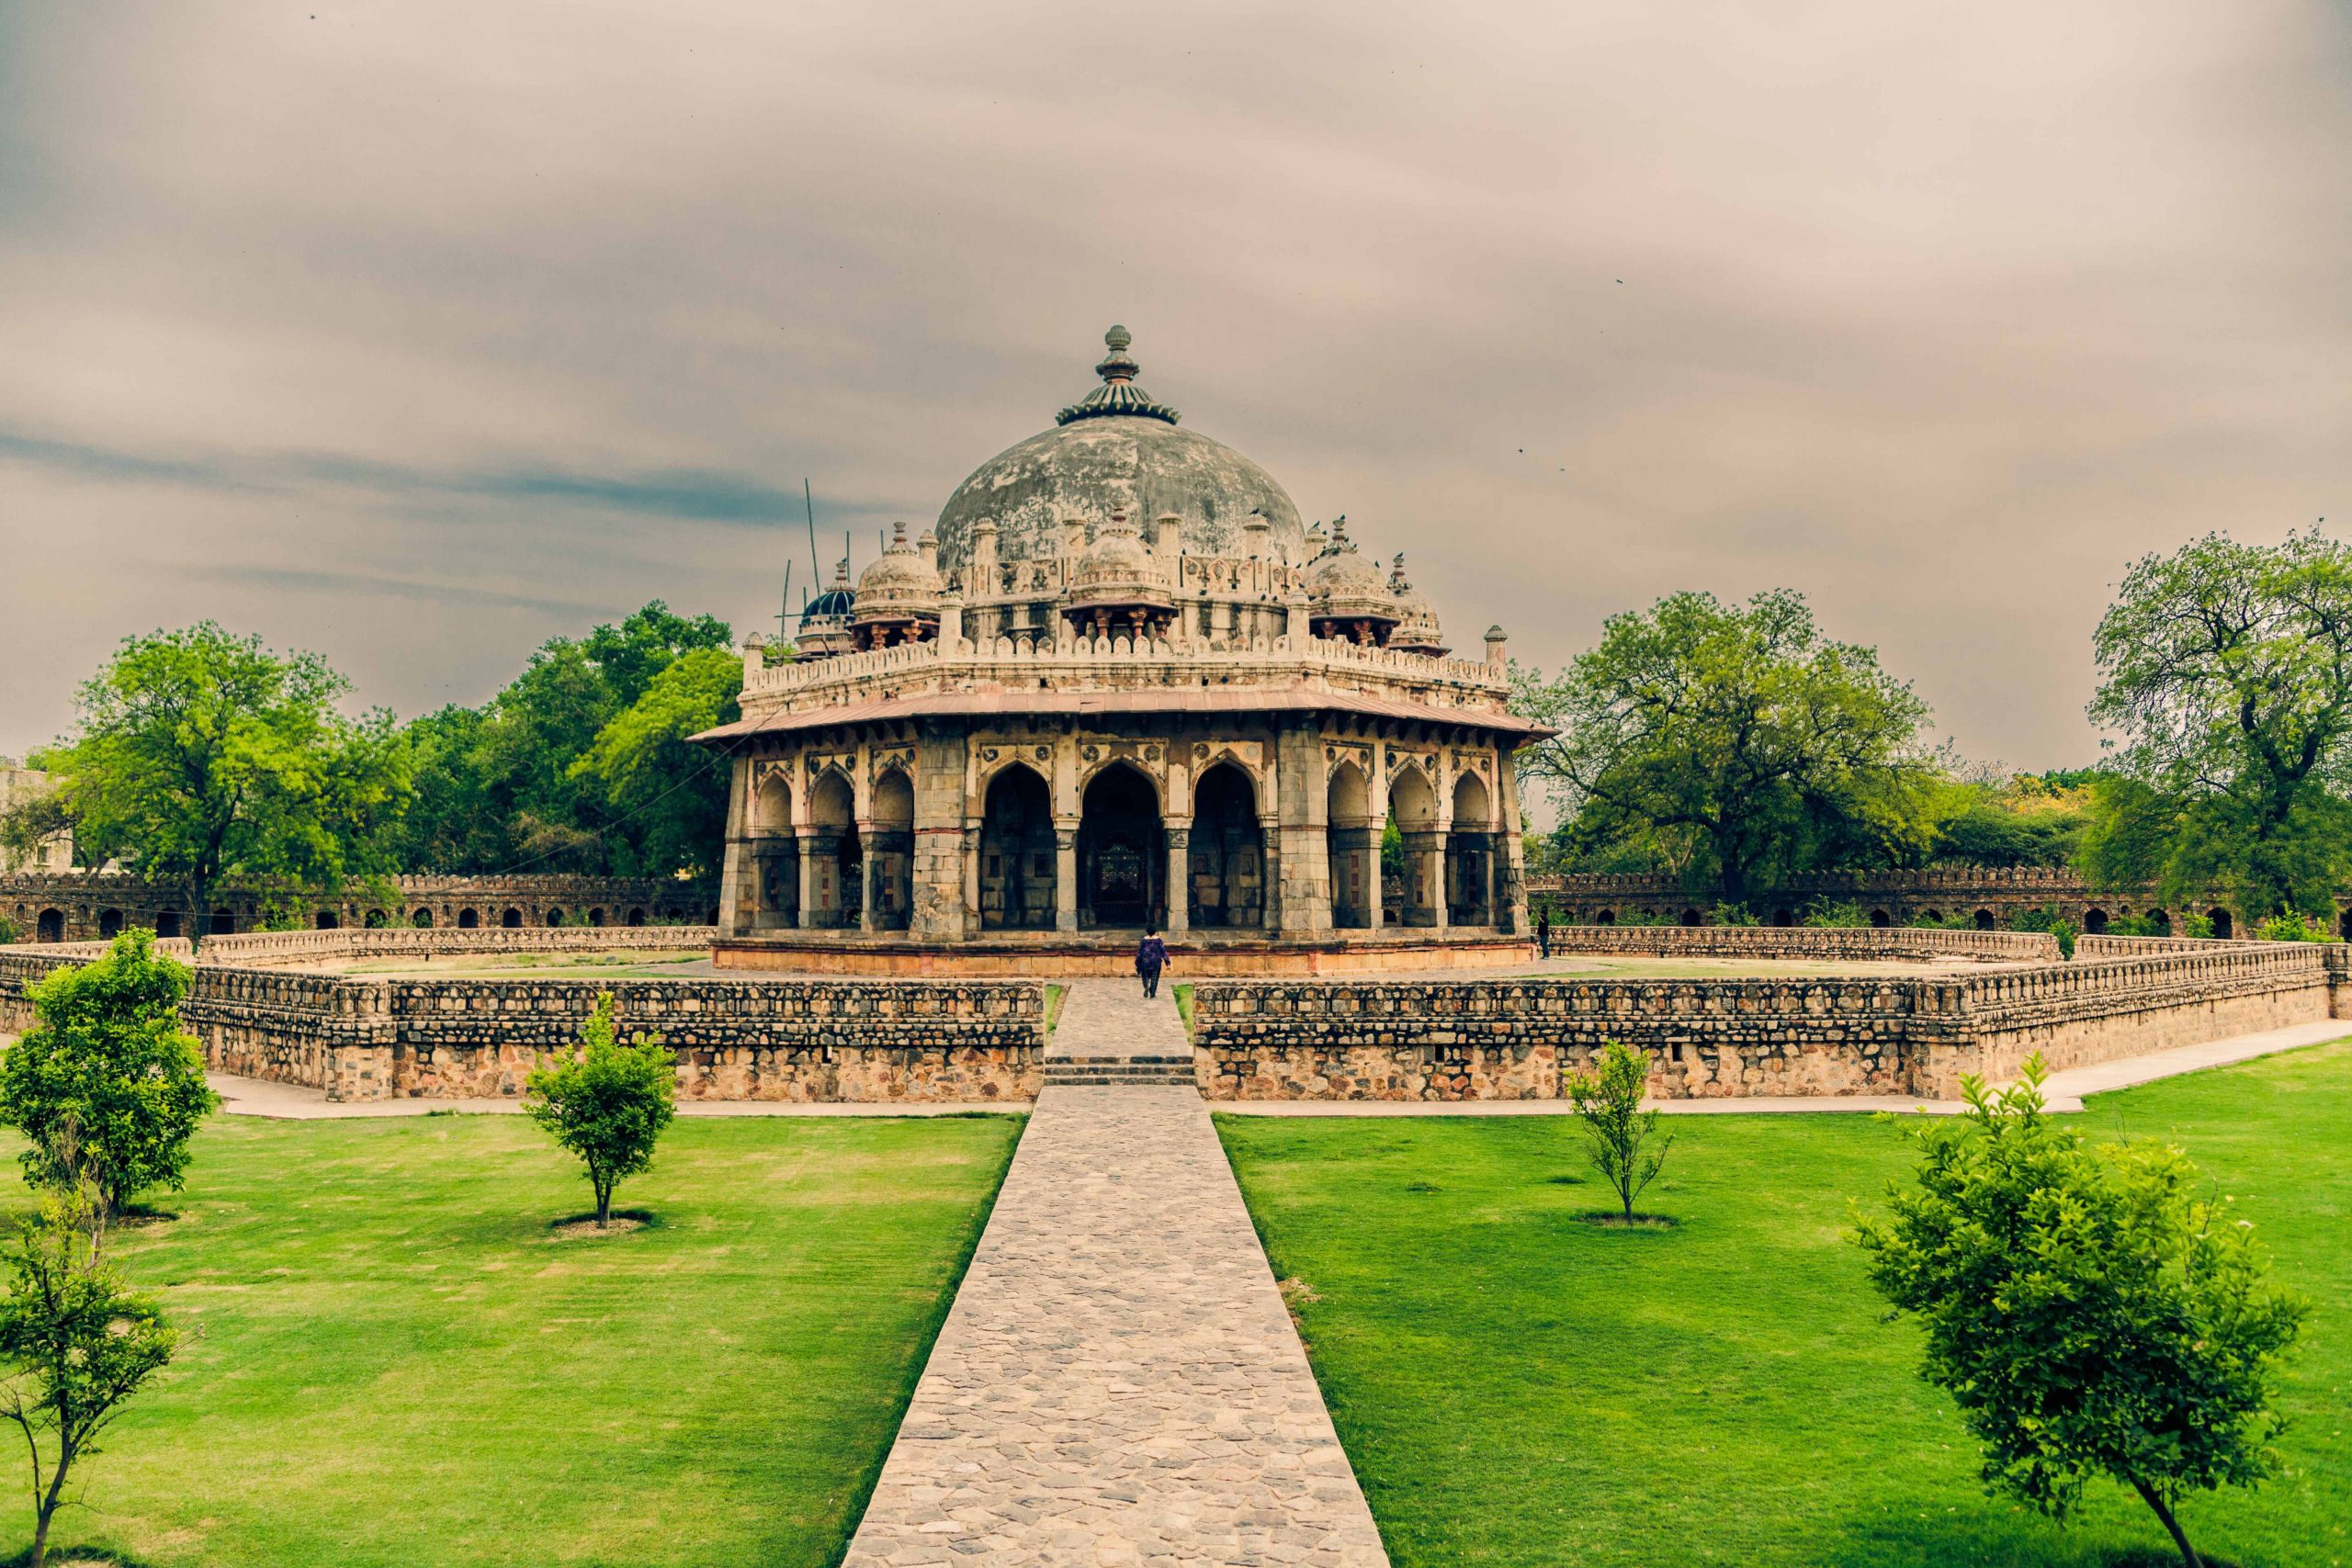 Beautiful shot of Isa Khan's Tomb in Delhi India under a cloudy sky